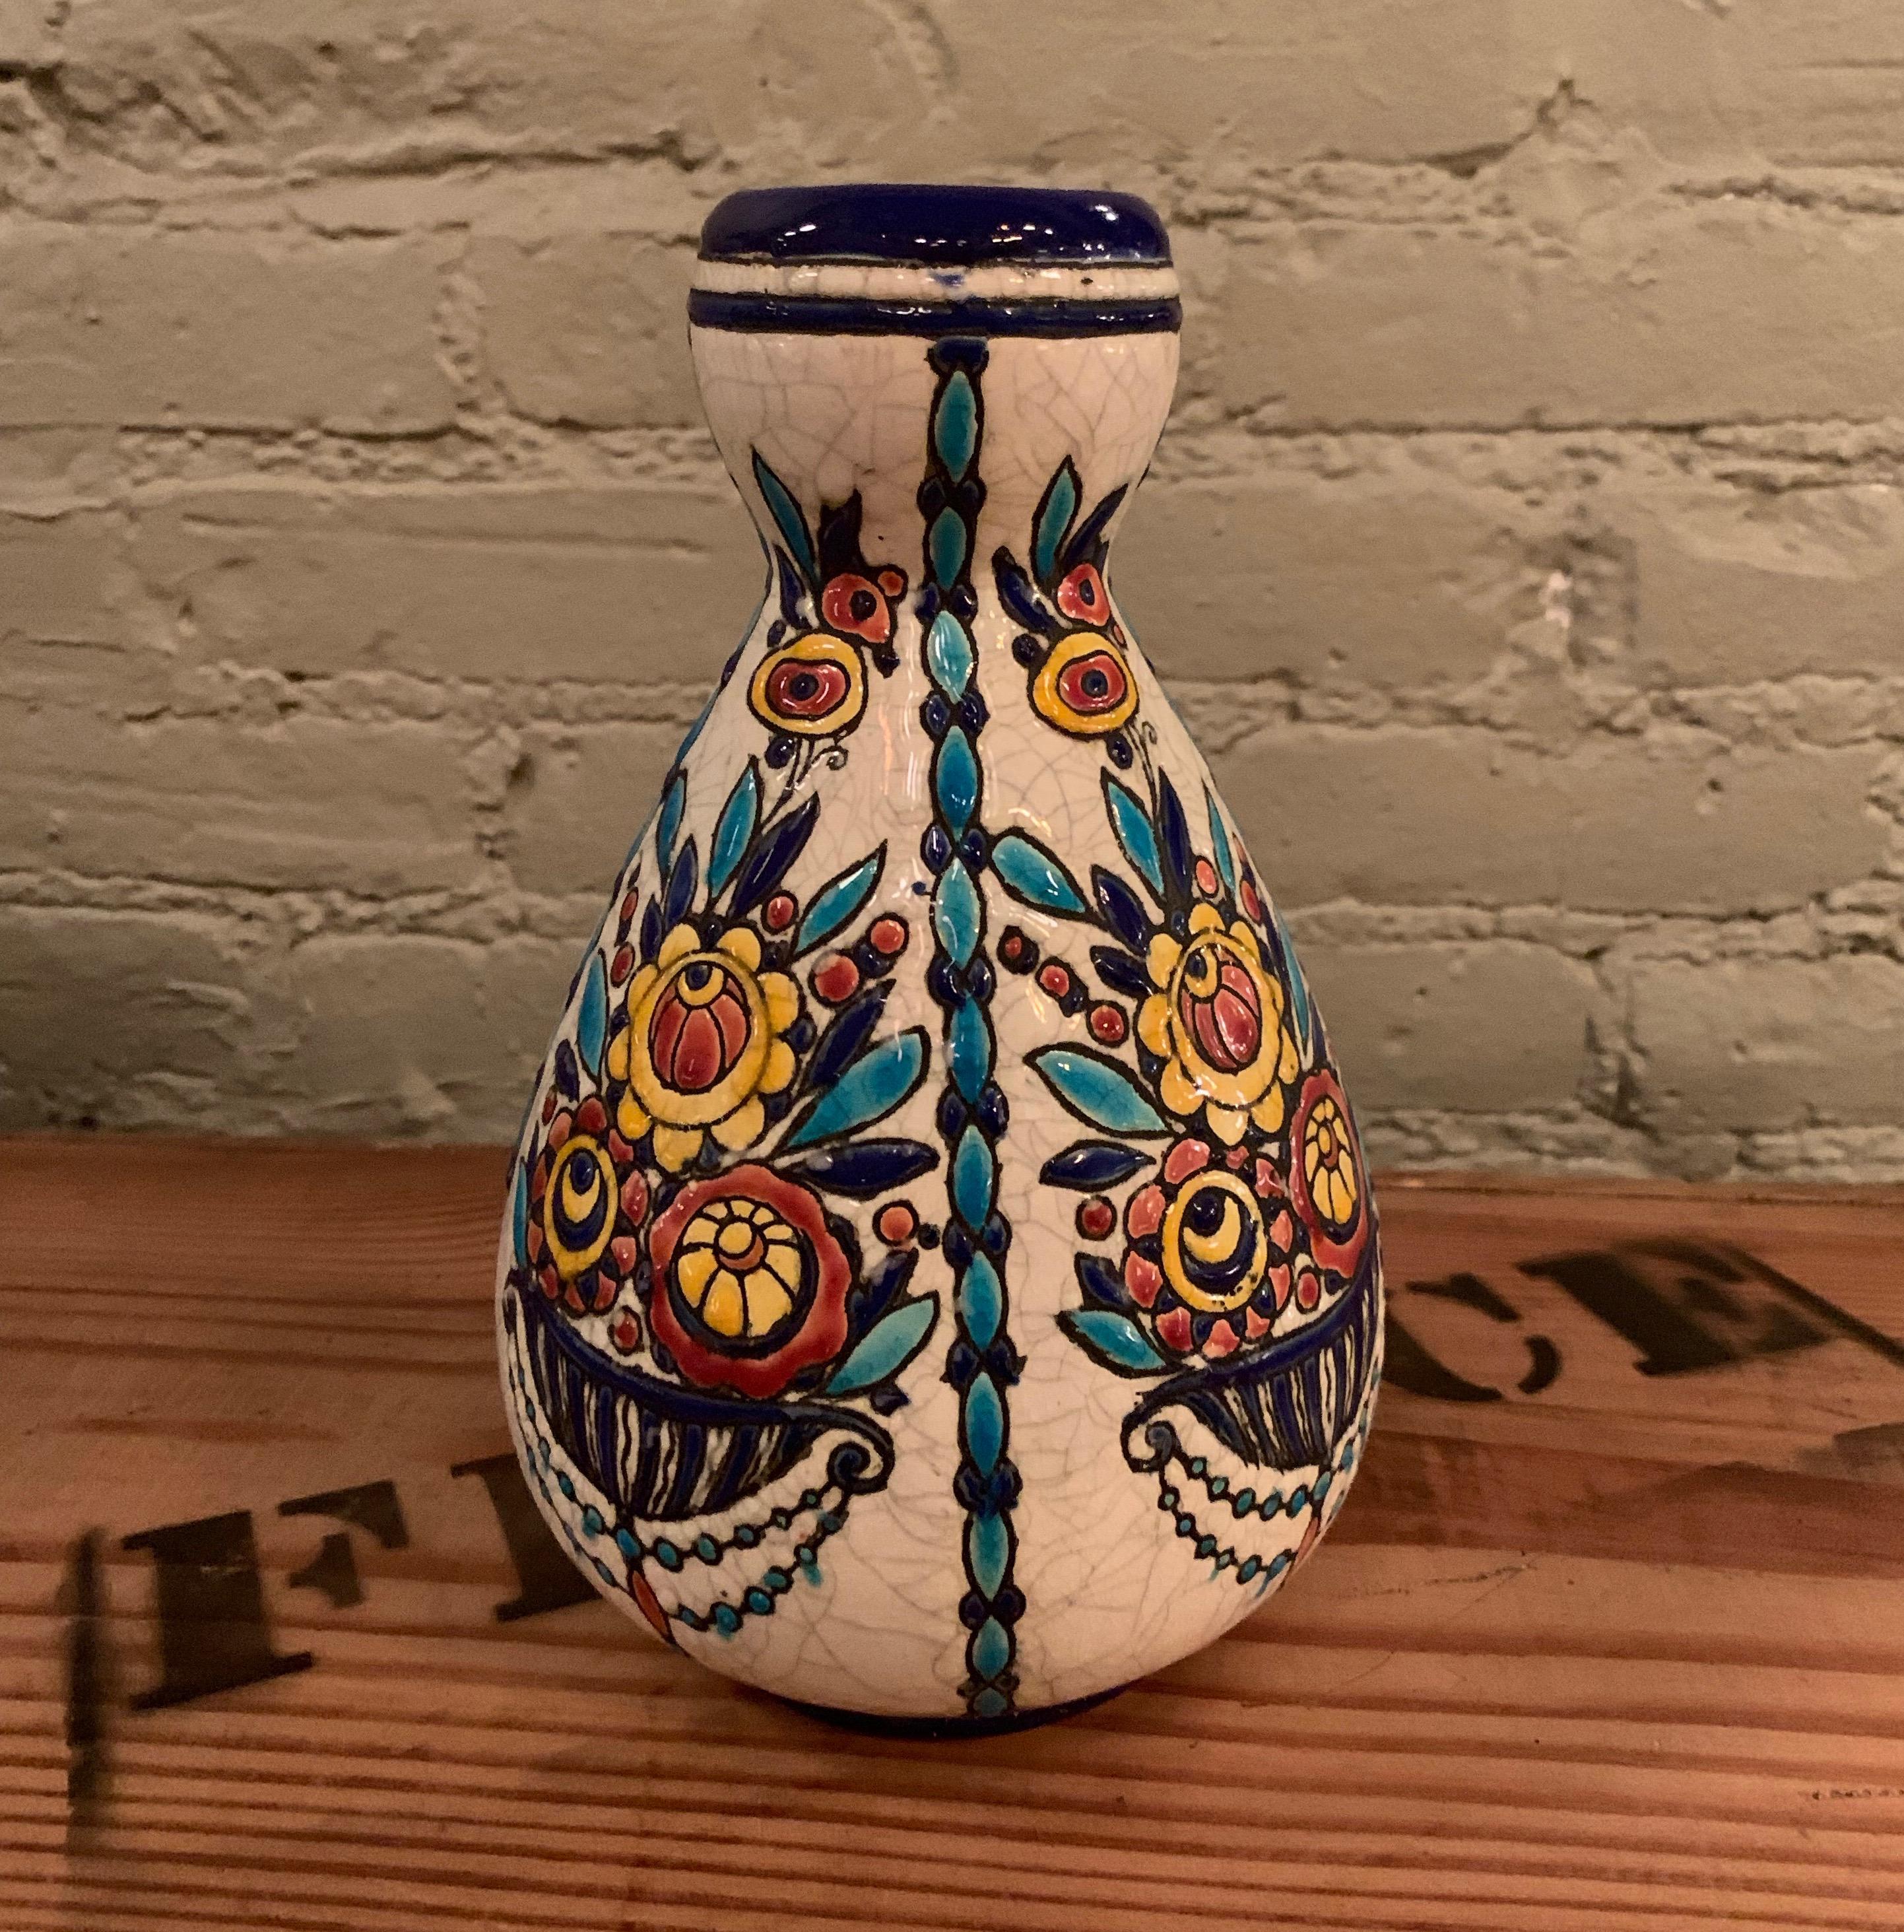 Hand painted enamel vase designed by Charles Catteau for Boch Frères Keramis; made in La Louviere, Belgium during the 1930s. The bottom features the Boch Frères official factory mark, as well as the 